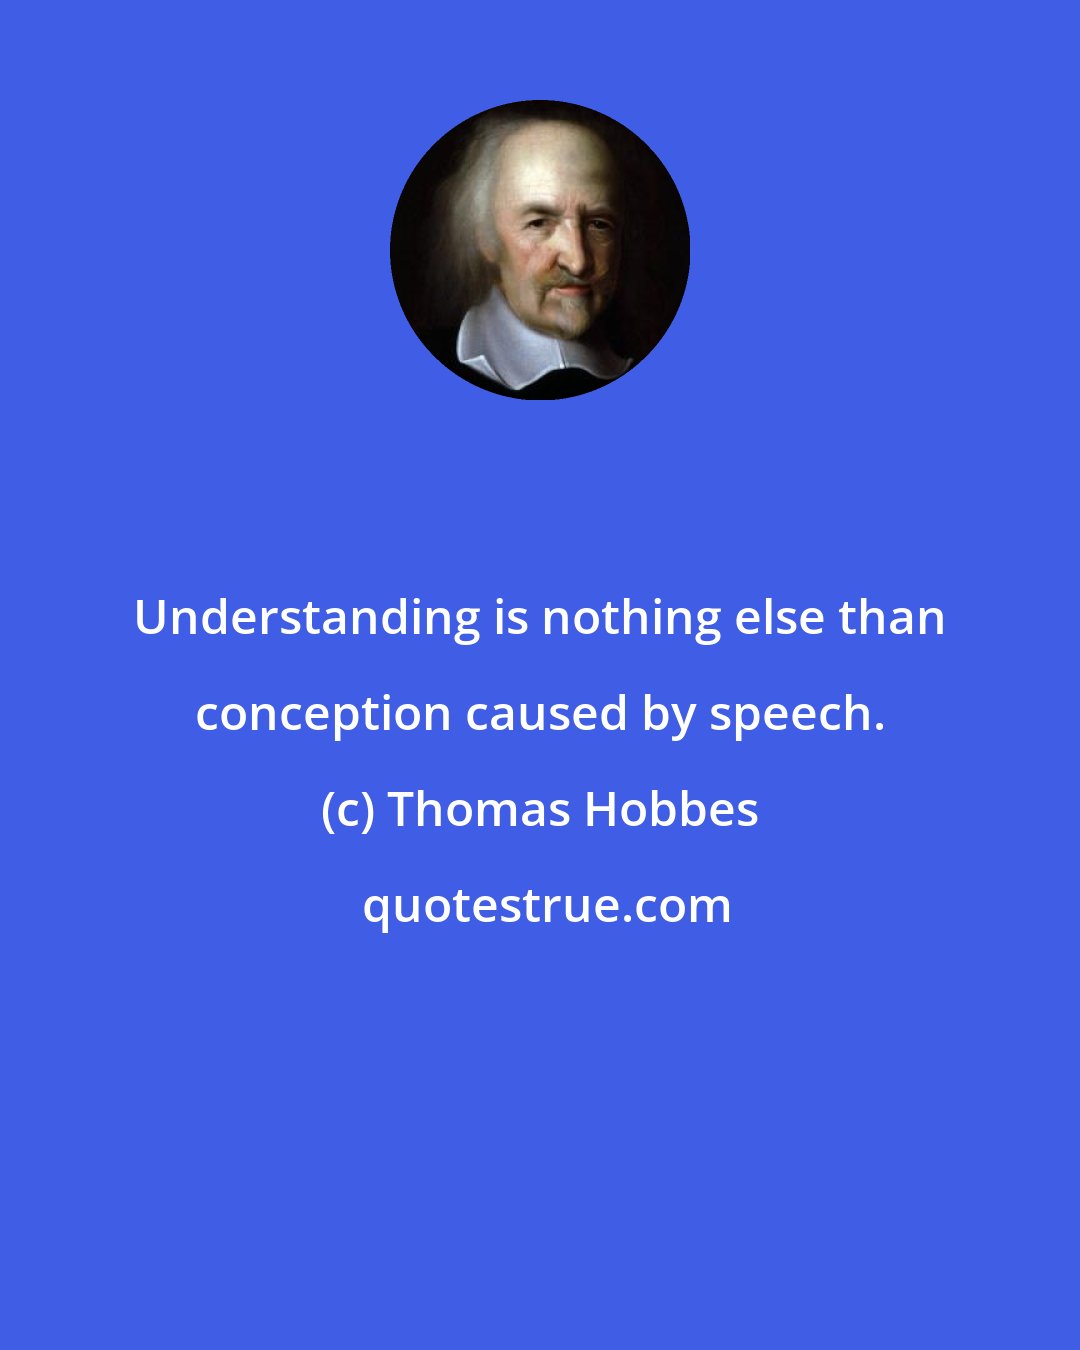 Thomas Hobbes: Understanding is nothing else than conception caused by speech.